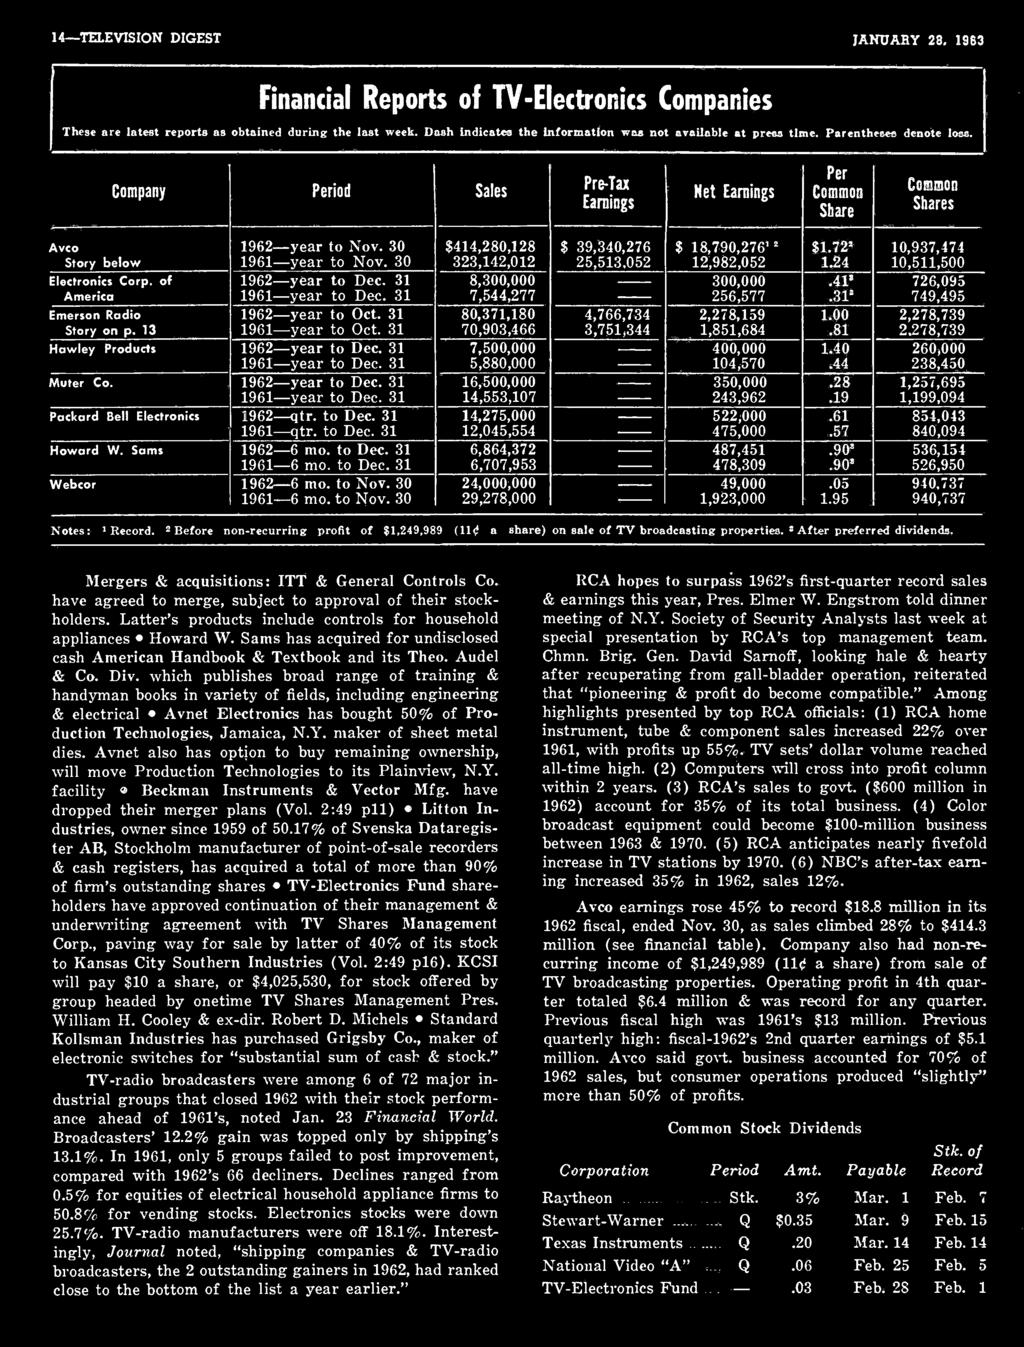 www.americanradiohistory.com... 14-TELEVISION DIGEST JANUARY 28, 1983 Financial Reports of TV -Electronics Companies These are latest reports as obtained during the last week.